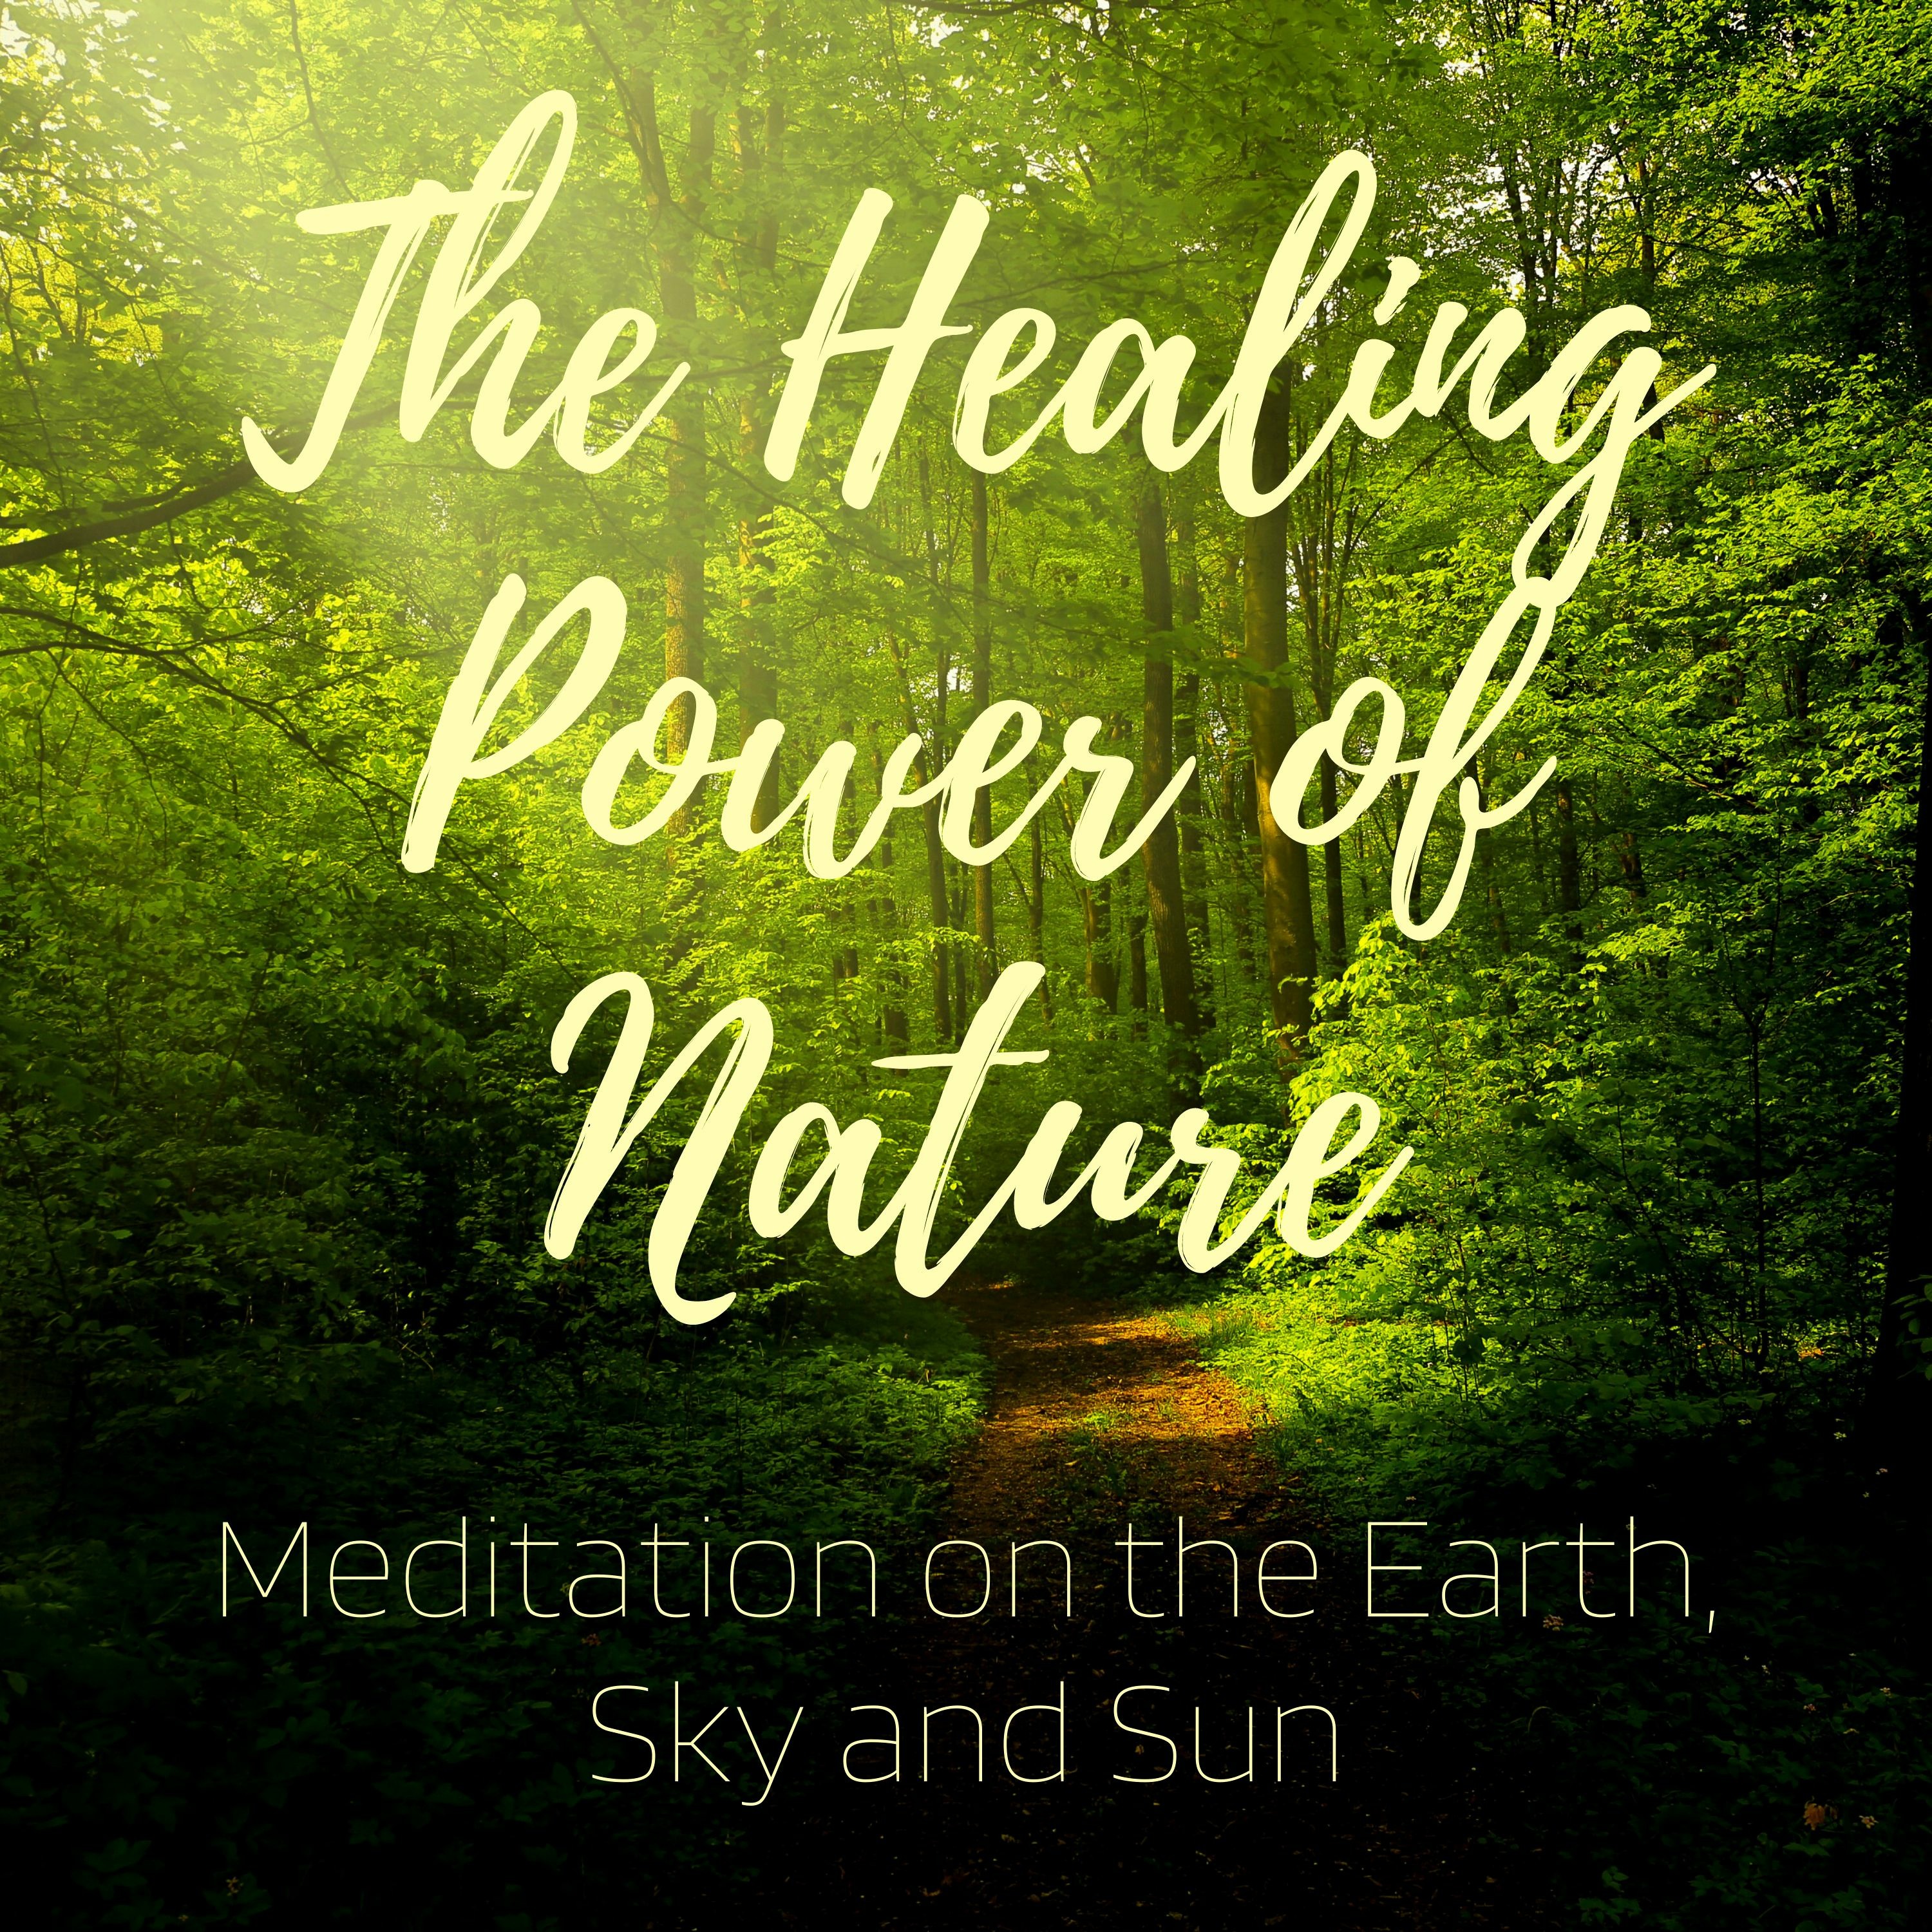 Meditation: The Healing Power of Nature - Meditation on the Earth, Sky and Sun (9 minutes)